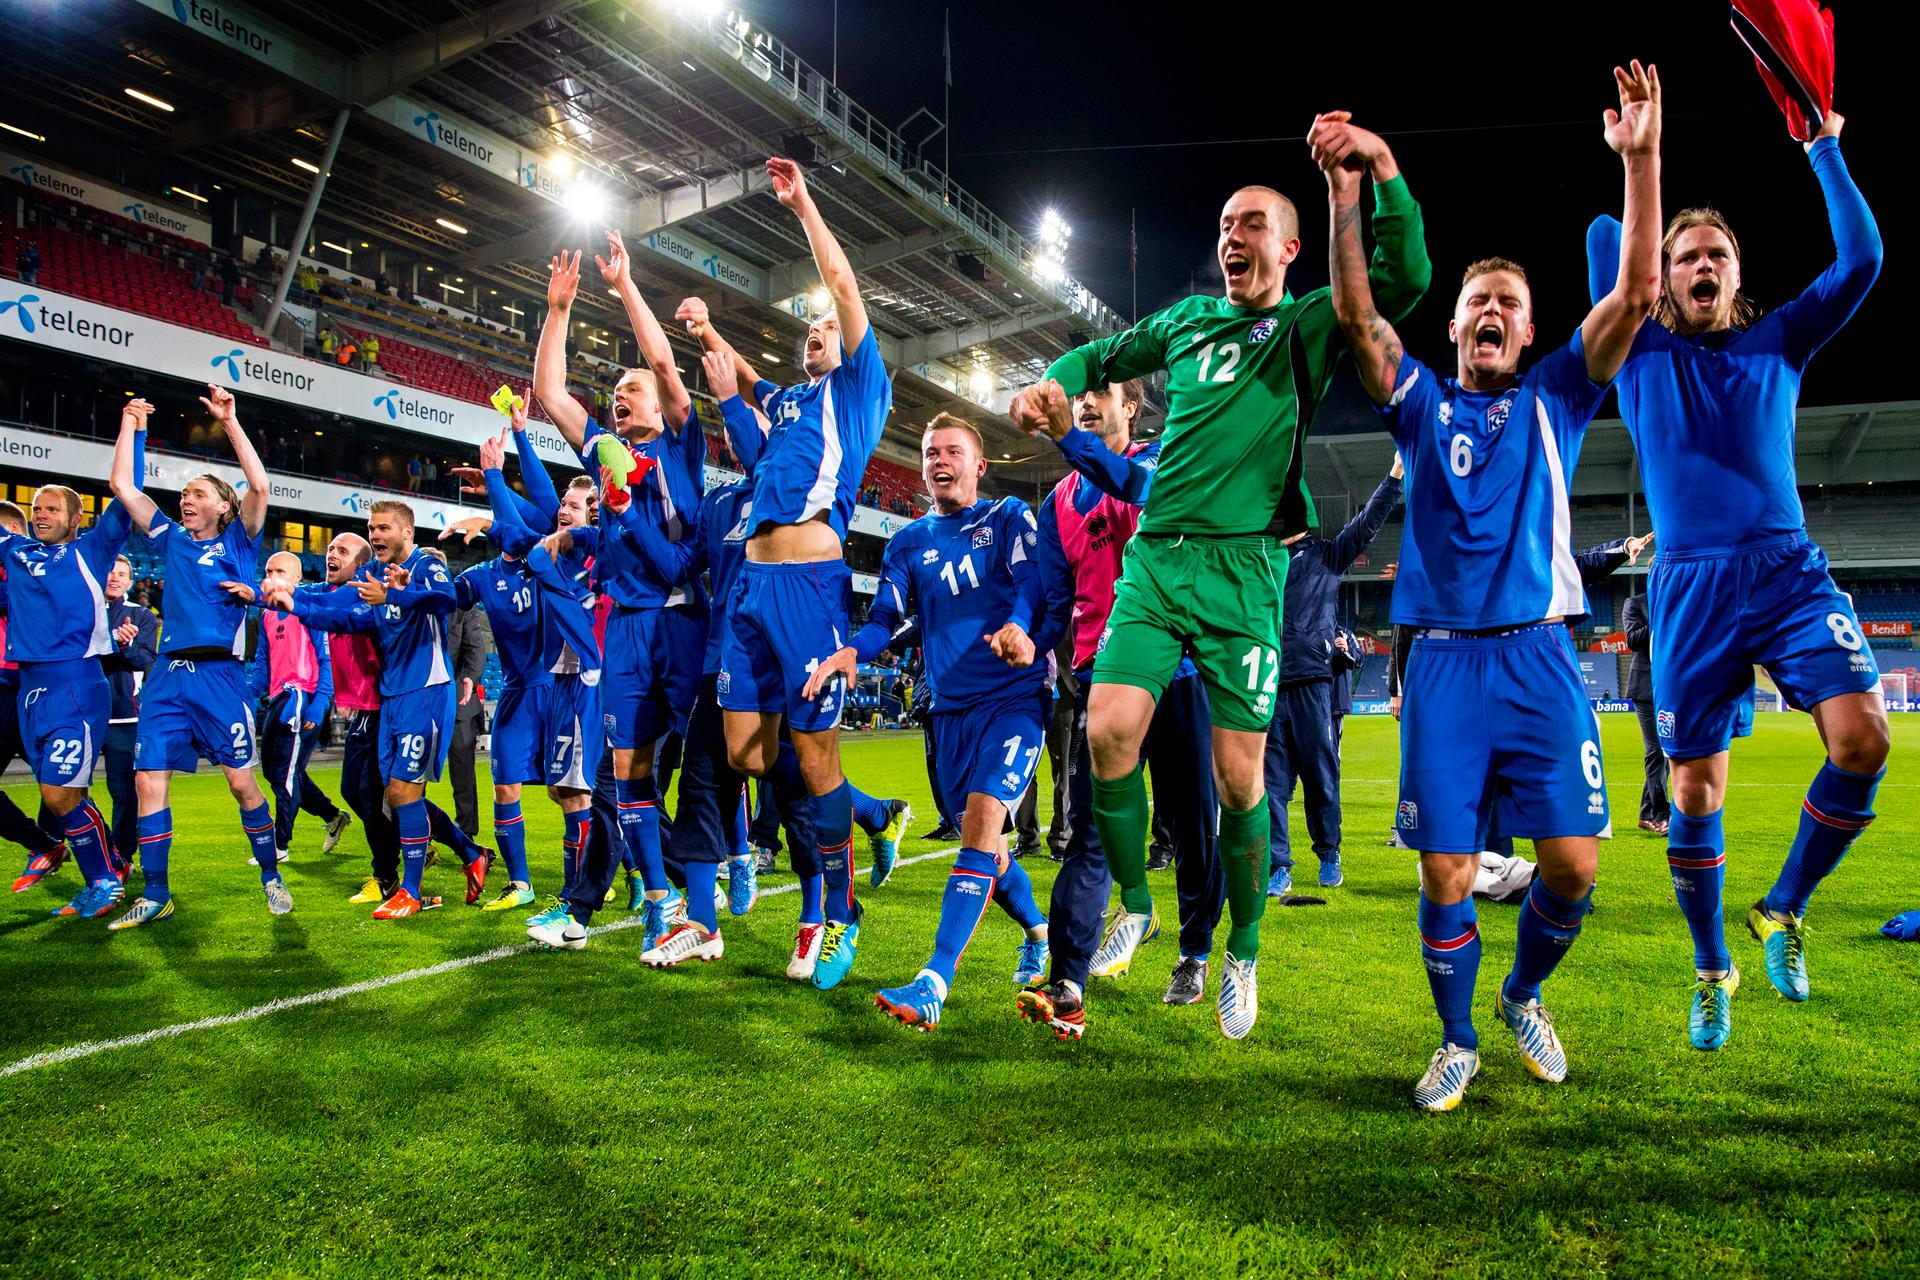 Iceland's team celebrates after their 2014 World Cup qualifying football match against Norway at Ullevaal stadium in Oslo, October 15, 2013.